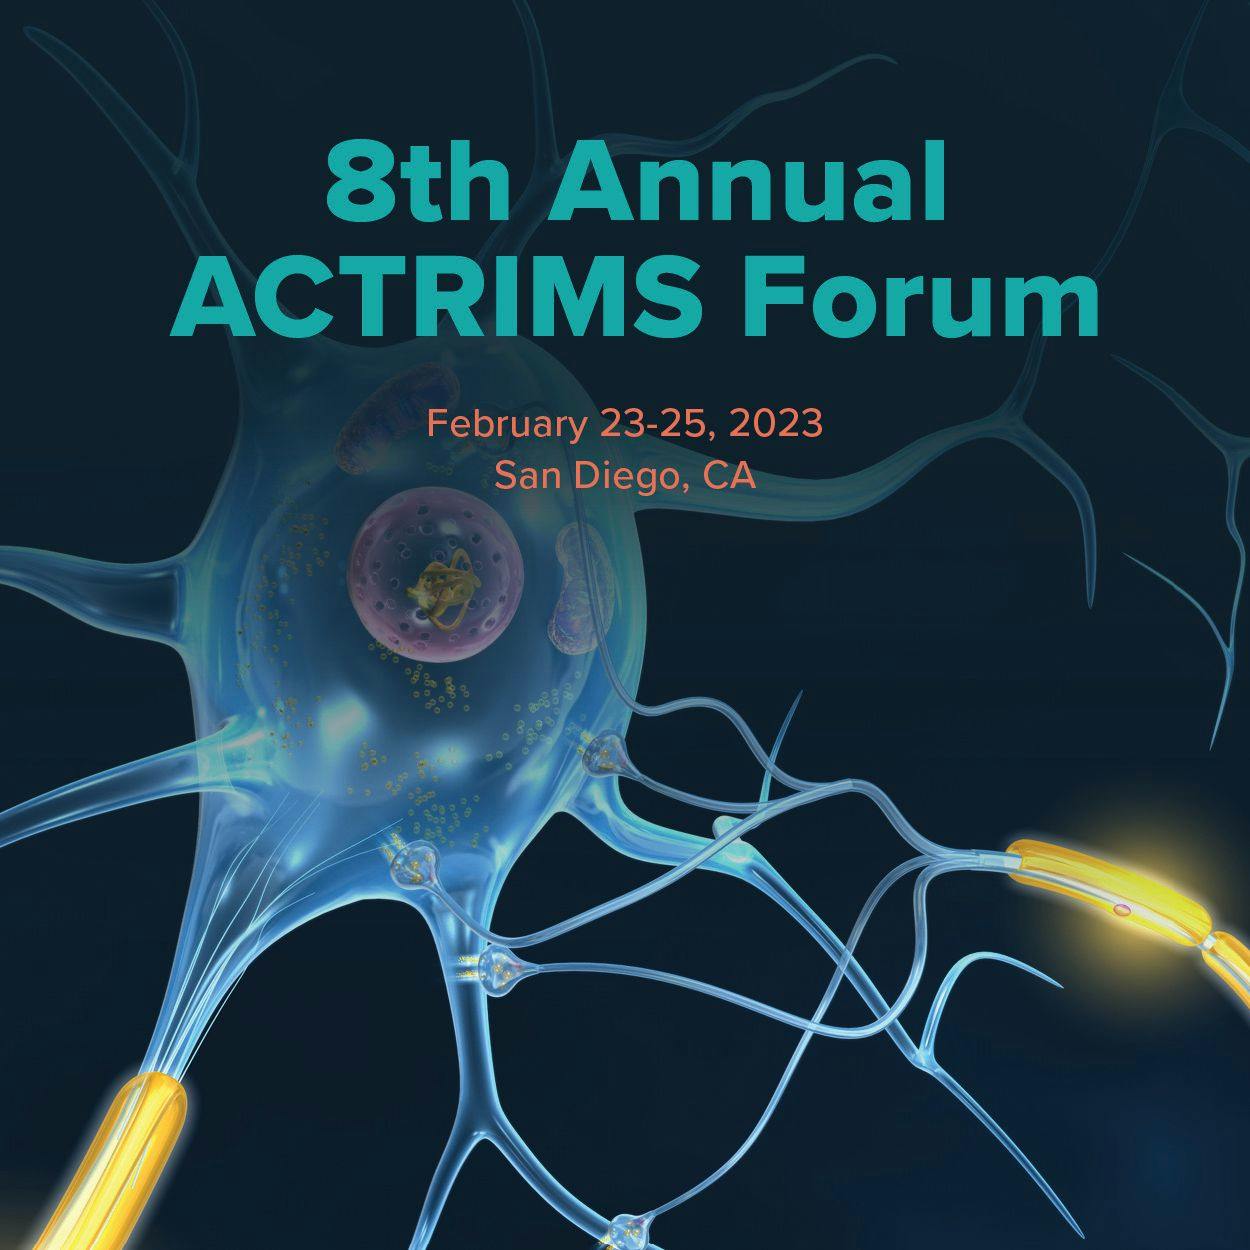 ACTRIMS 2023: What to Expect From the Annual Forum